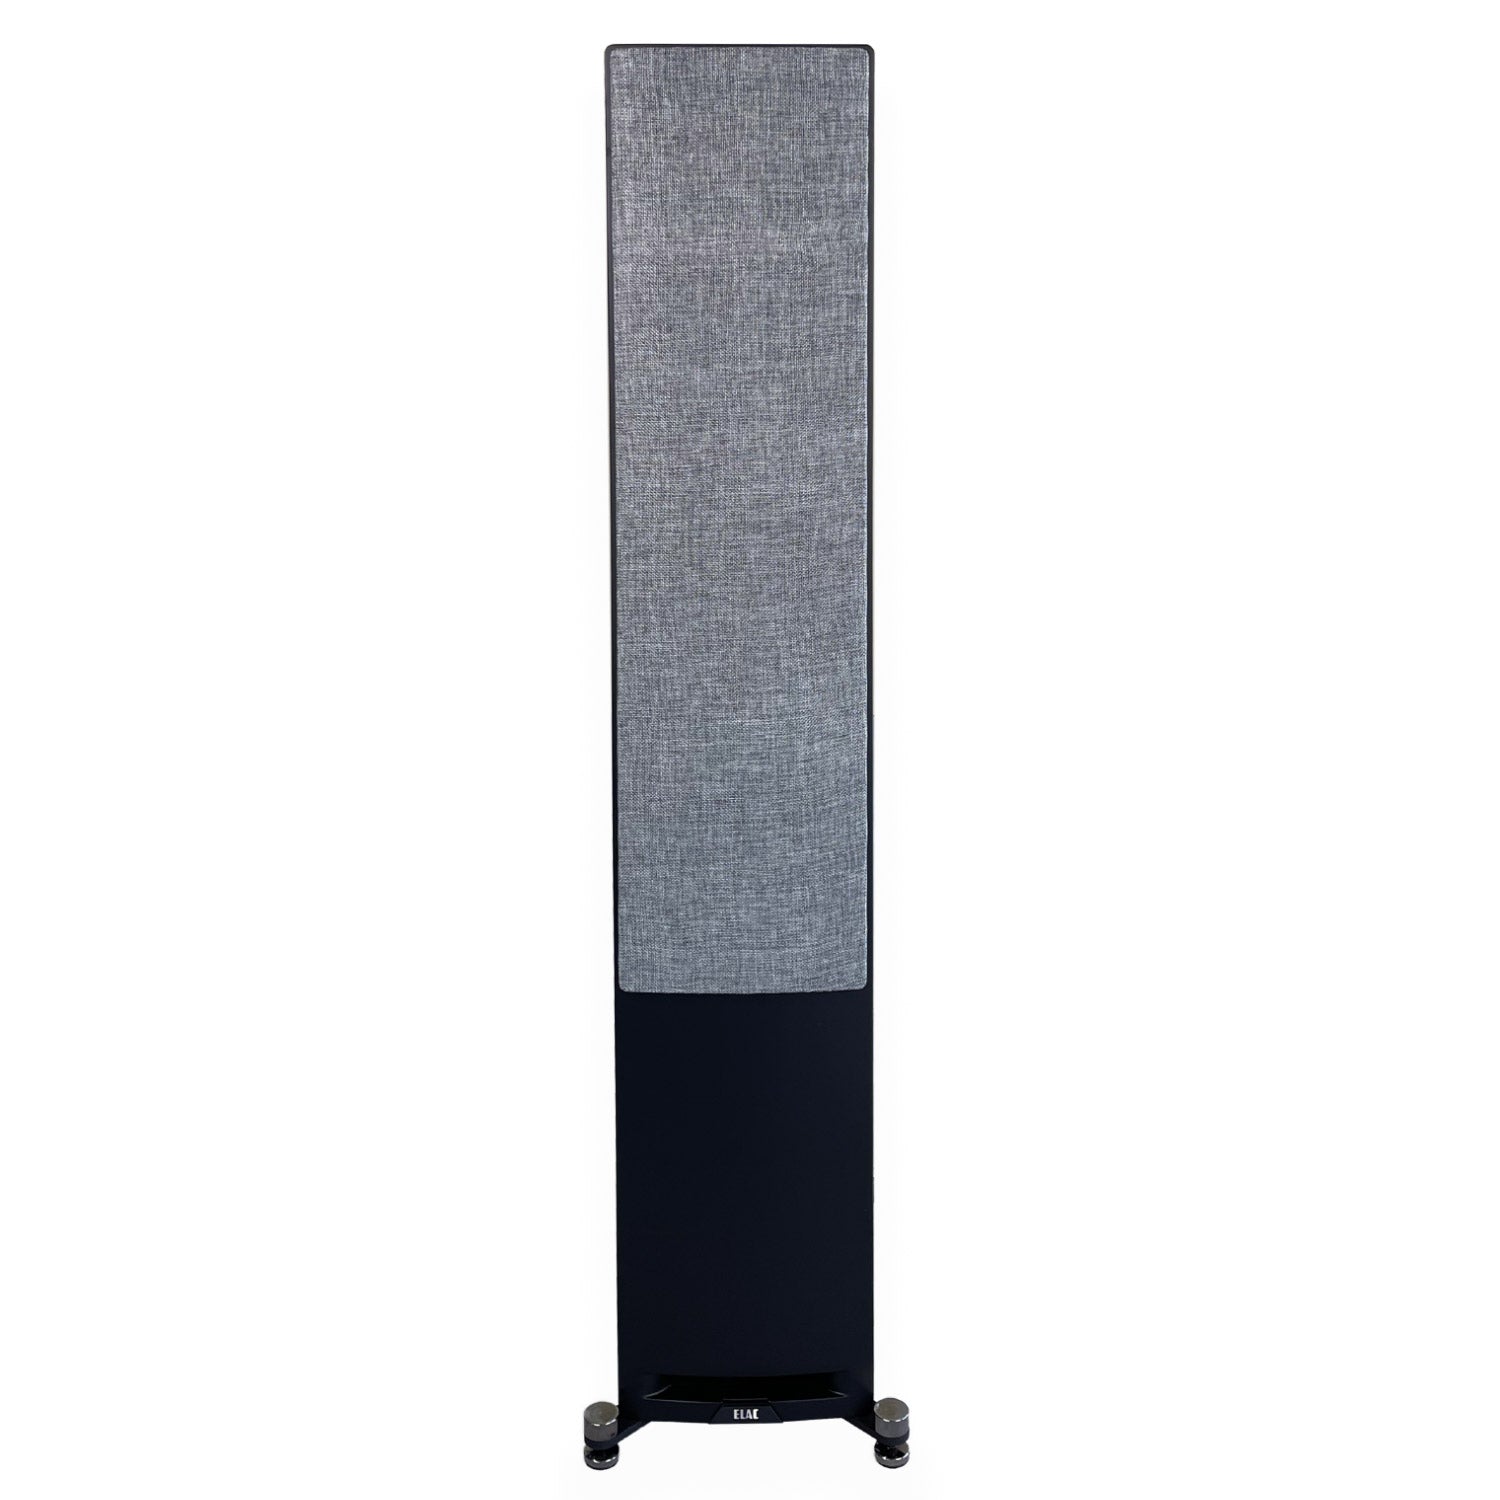 ELAC Debut Reference DFR-52 Floorstanding Loudspeakers Black with grill cover